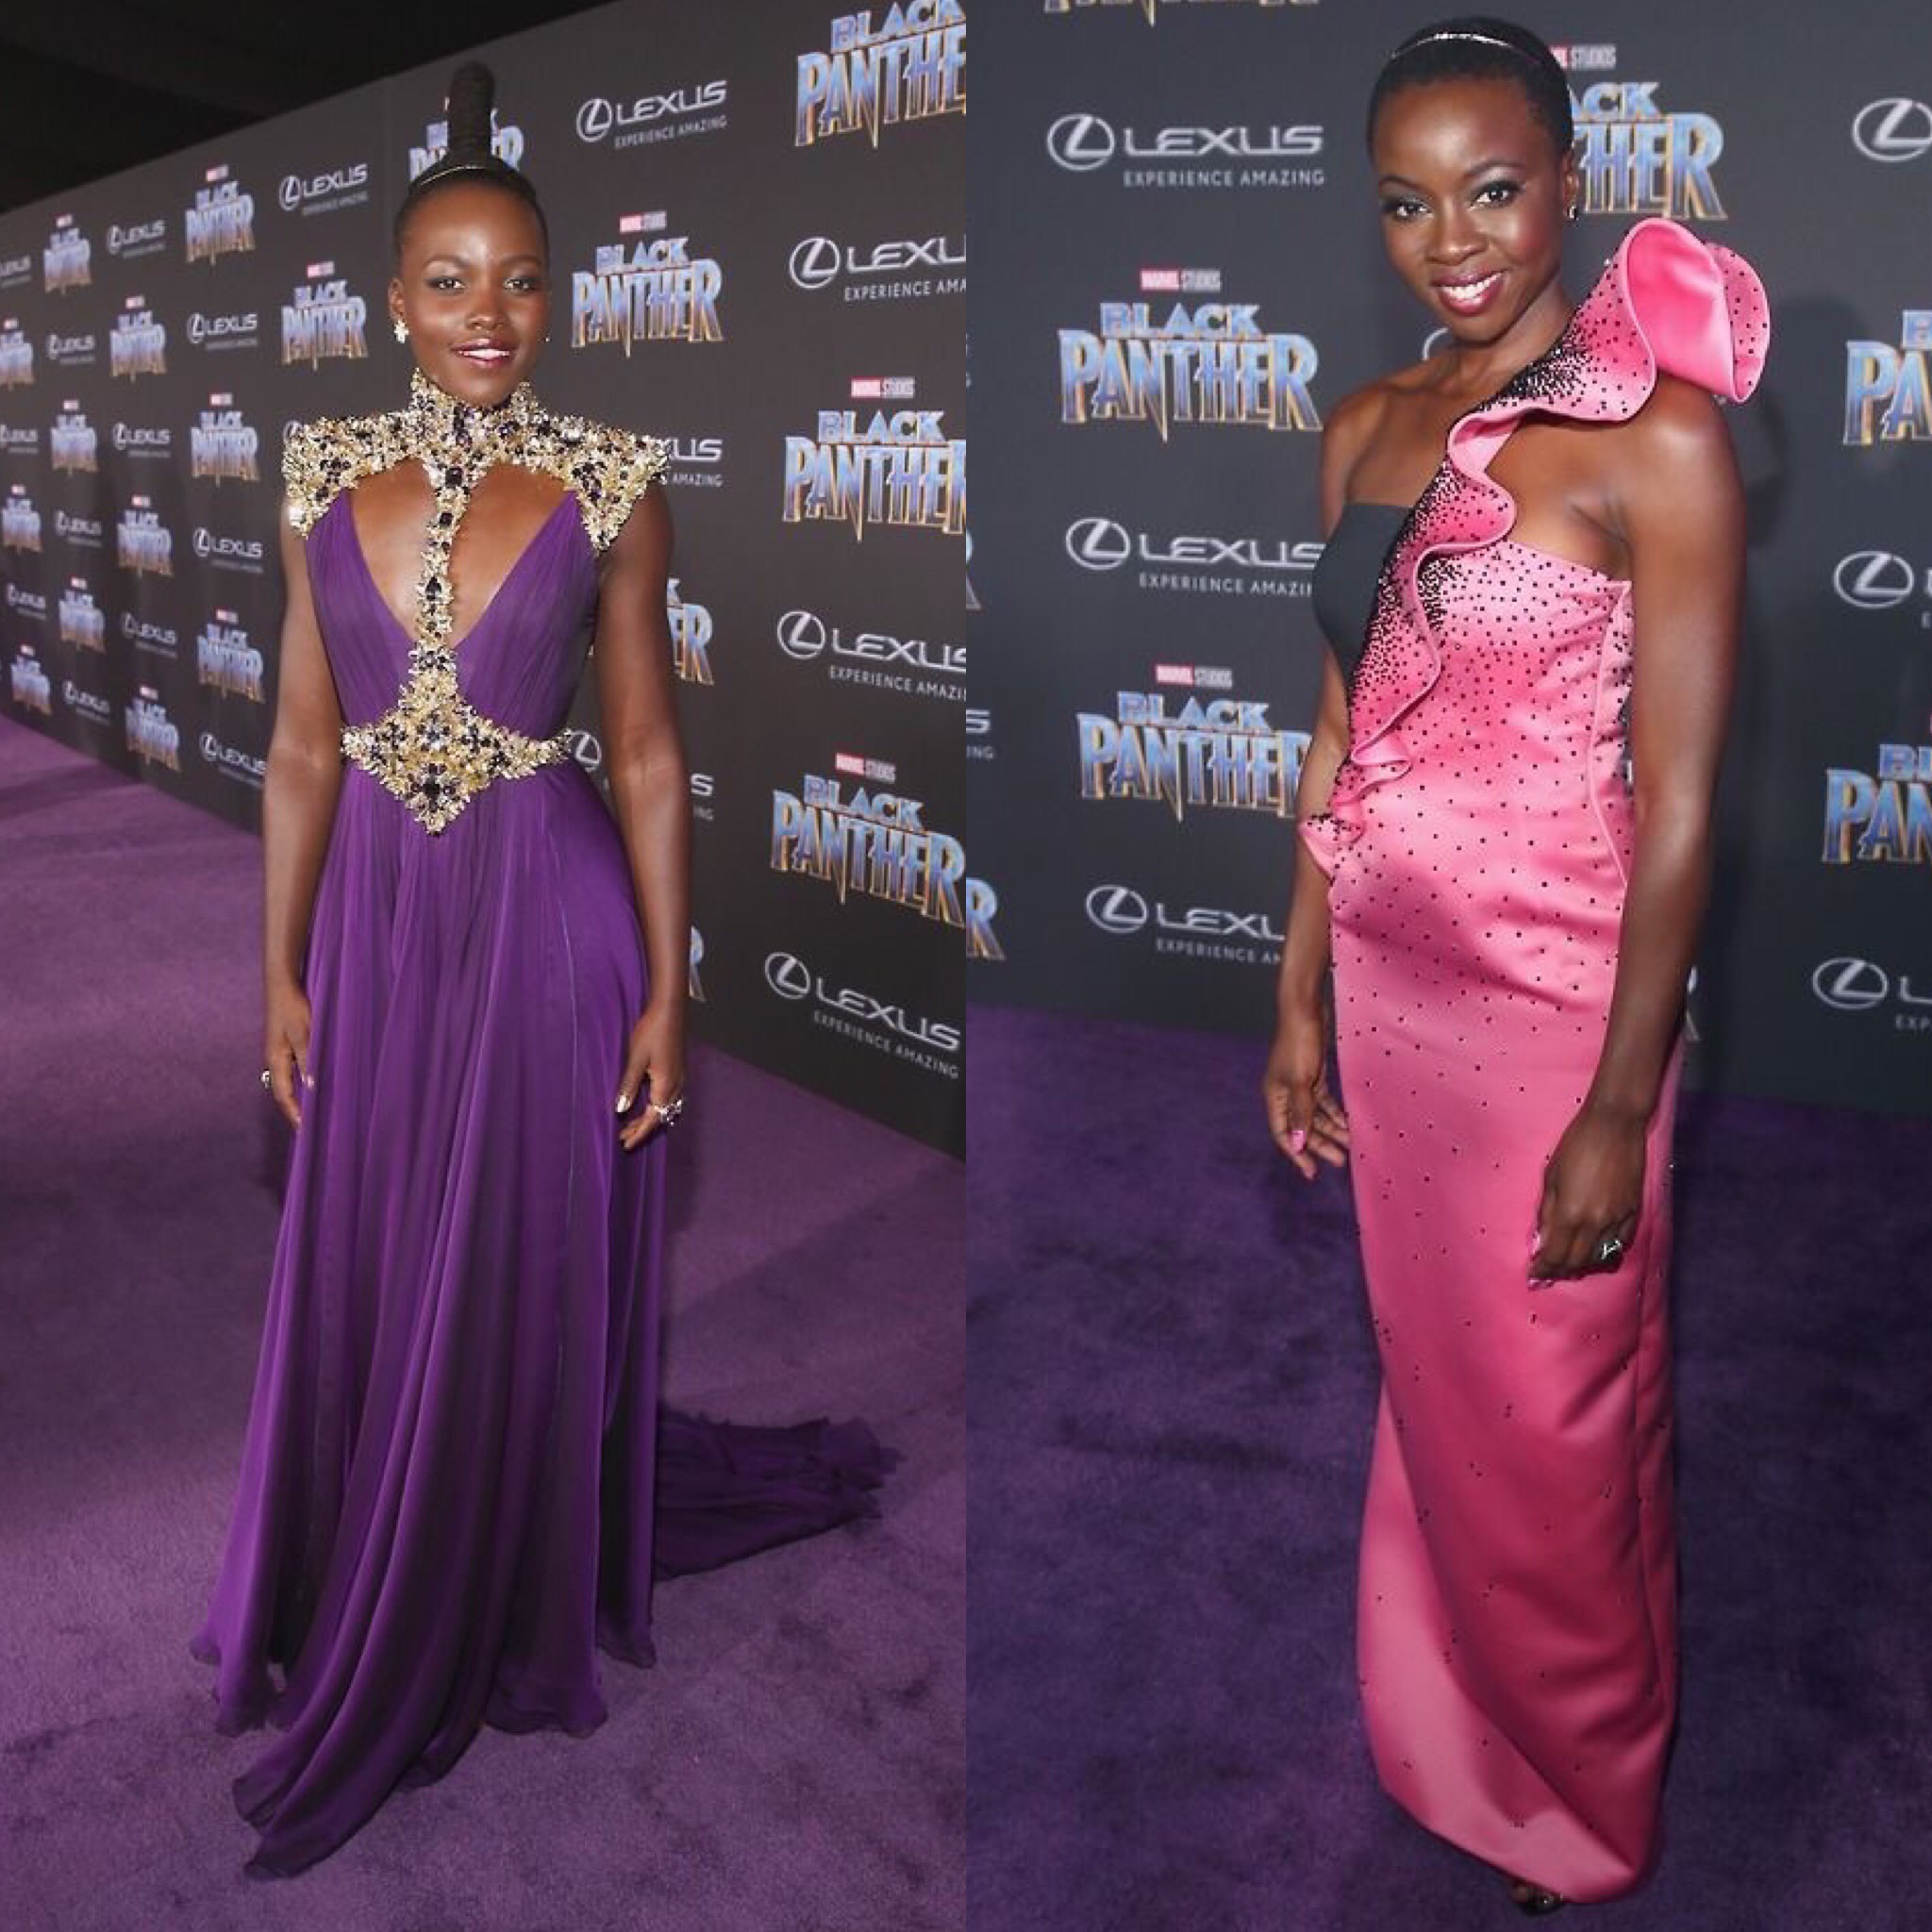 Round Table Discussion With Lupita Nyong’o & Danai Gurira From Black Panther